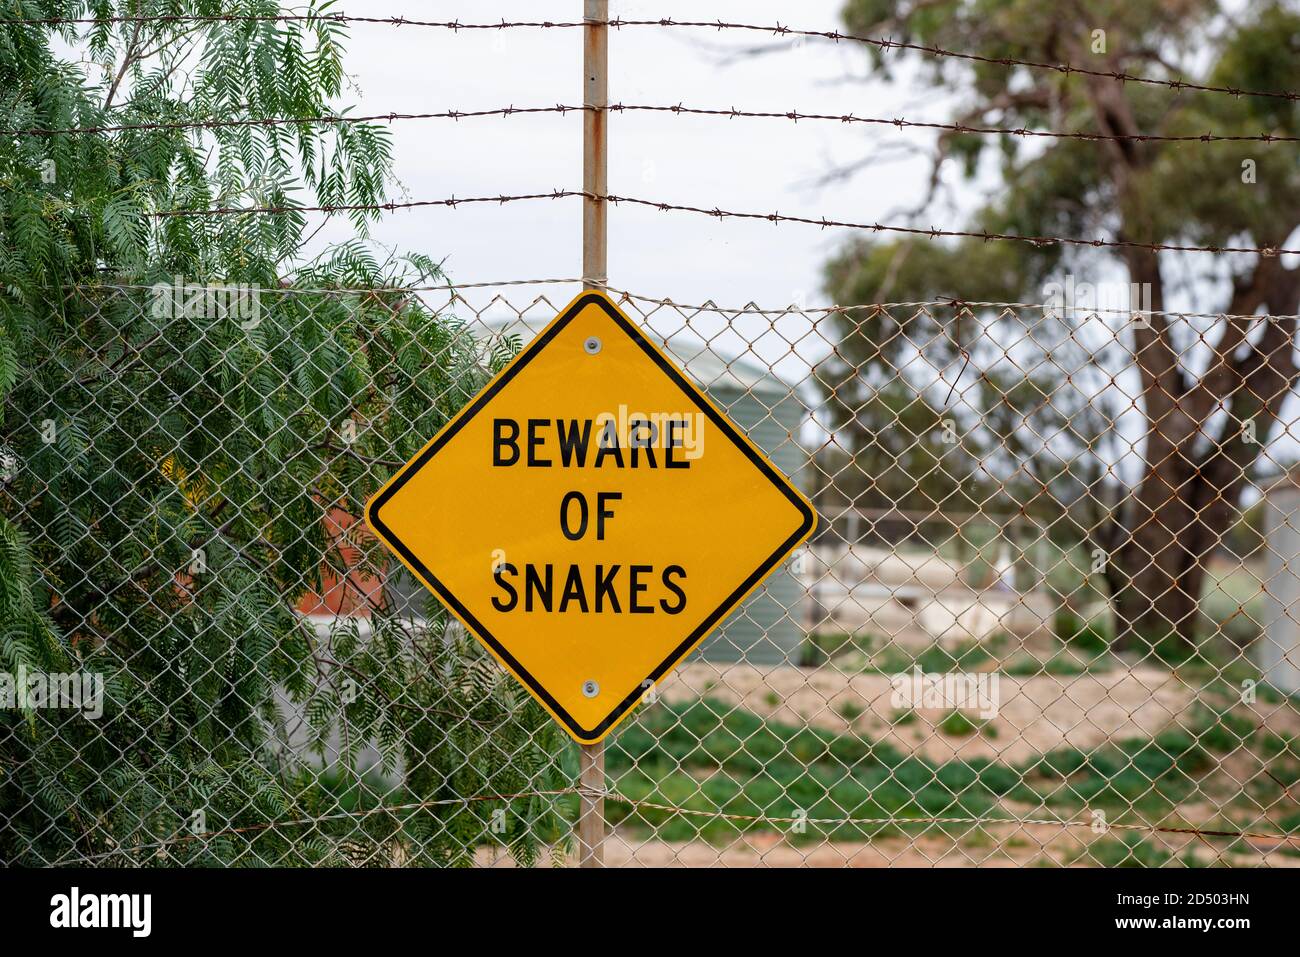 Beware of snakes yellow sign on wire fence in NSW Australia Stock Photo